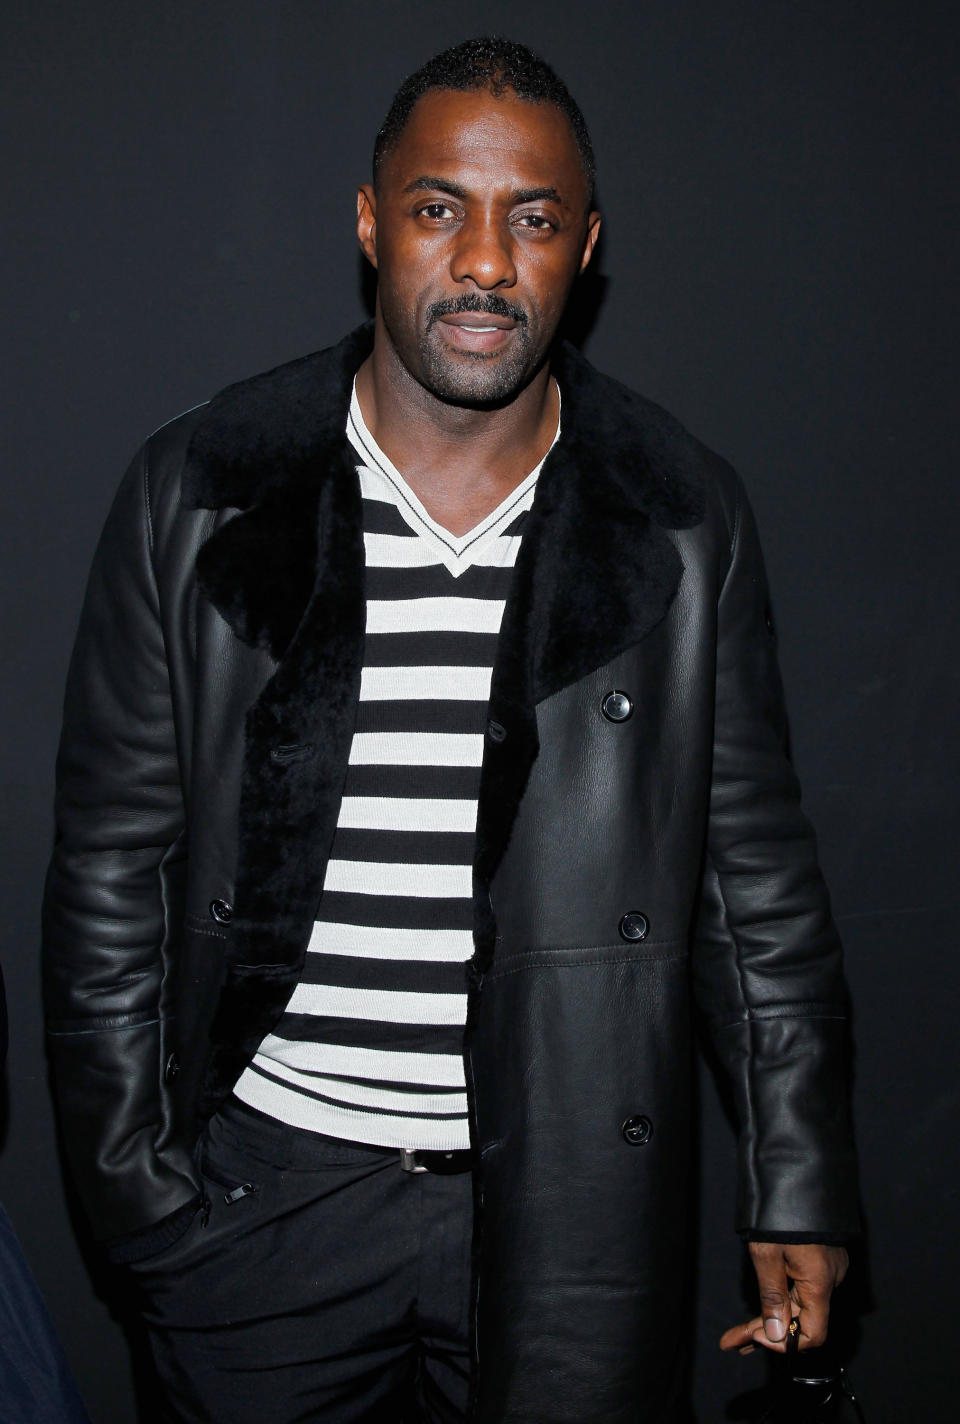 NEW YORK, NY - FEBRUARY 12:  Idris Elba attends the Y-3 Fashion Show Autumn/Winter 2012-13 at 82 Mercer on February 12, 2012 in New York City.  (Photo by Joe Kohen/Getty Images for Y-3)